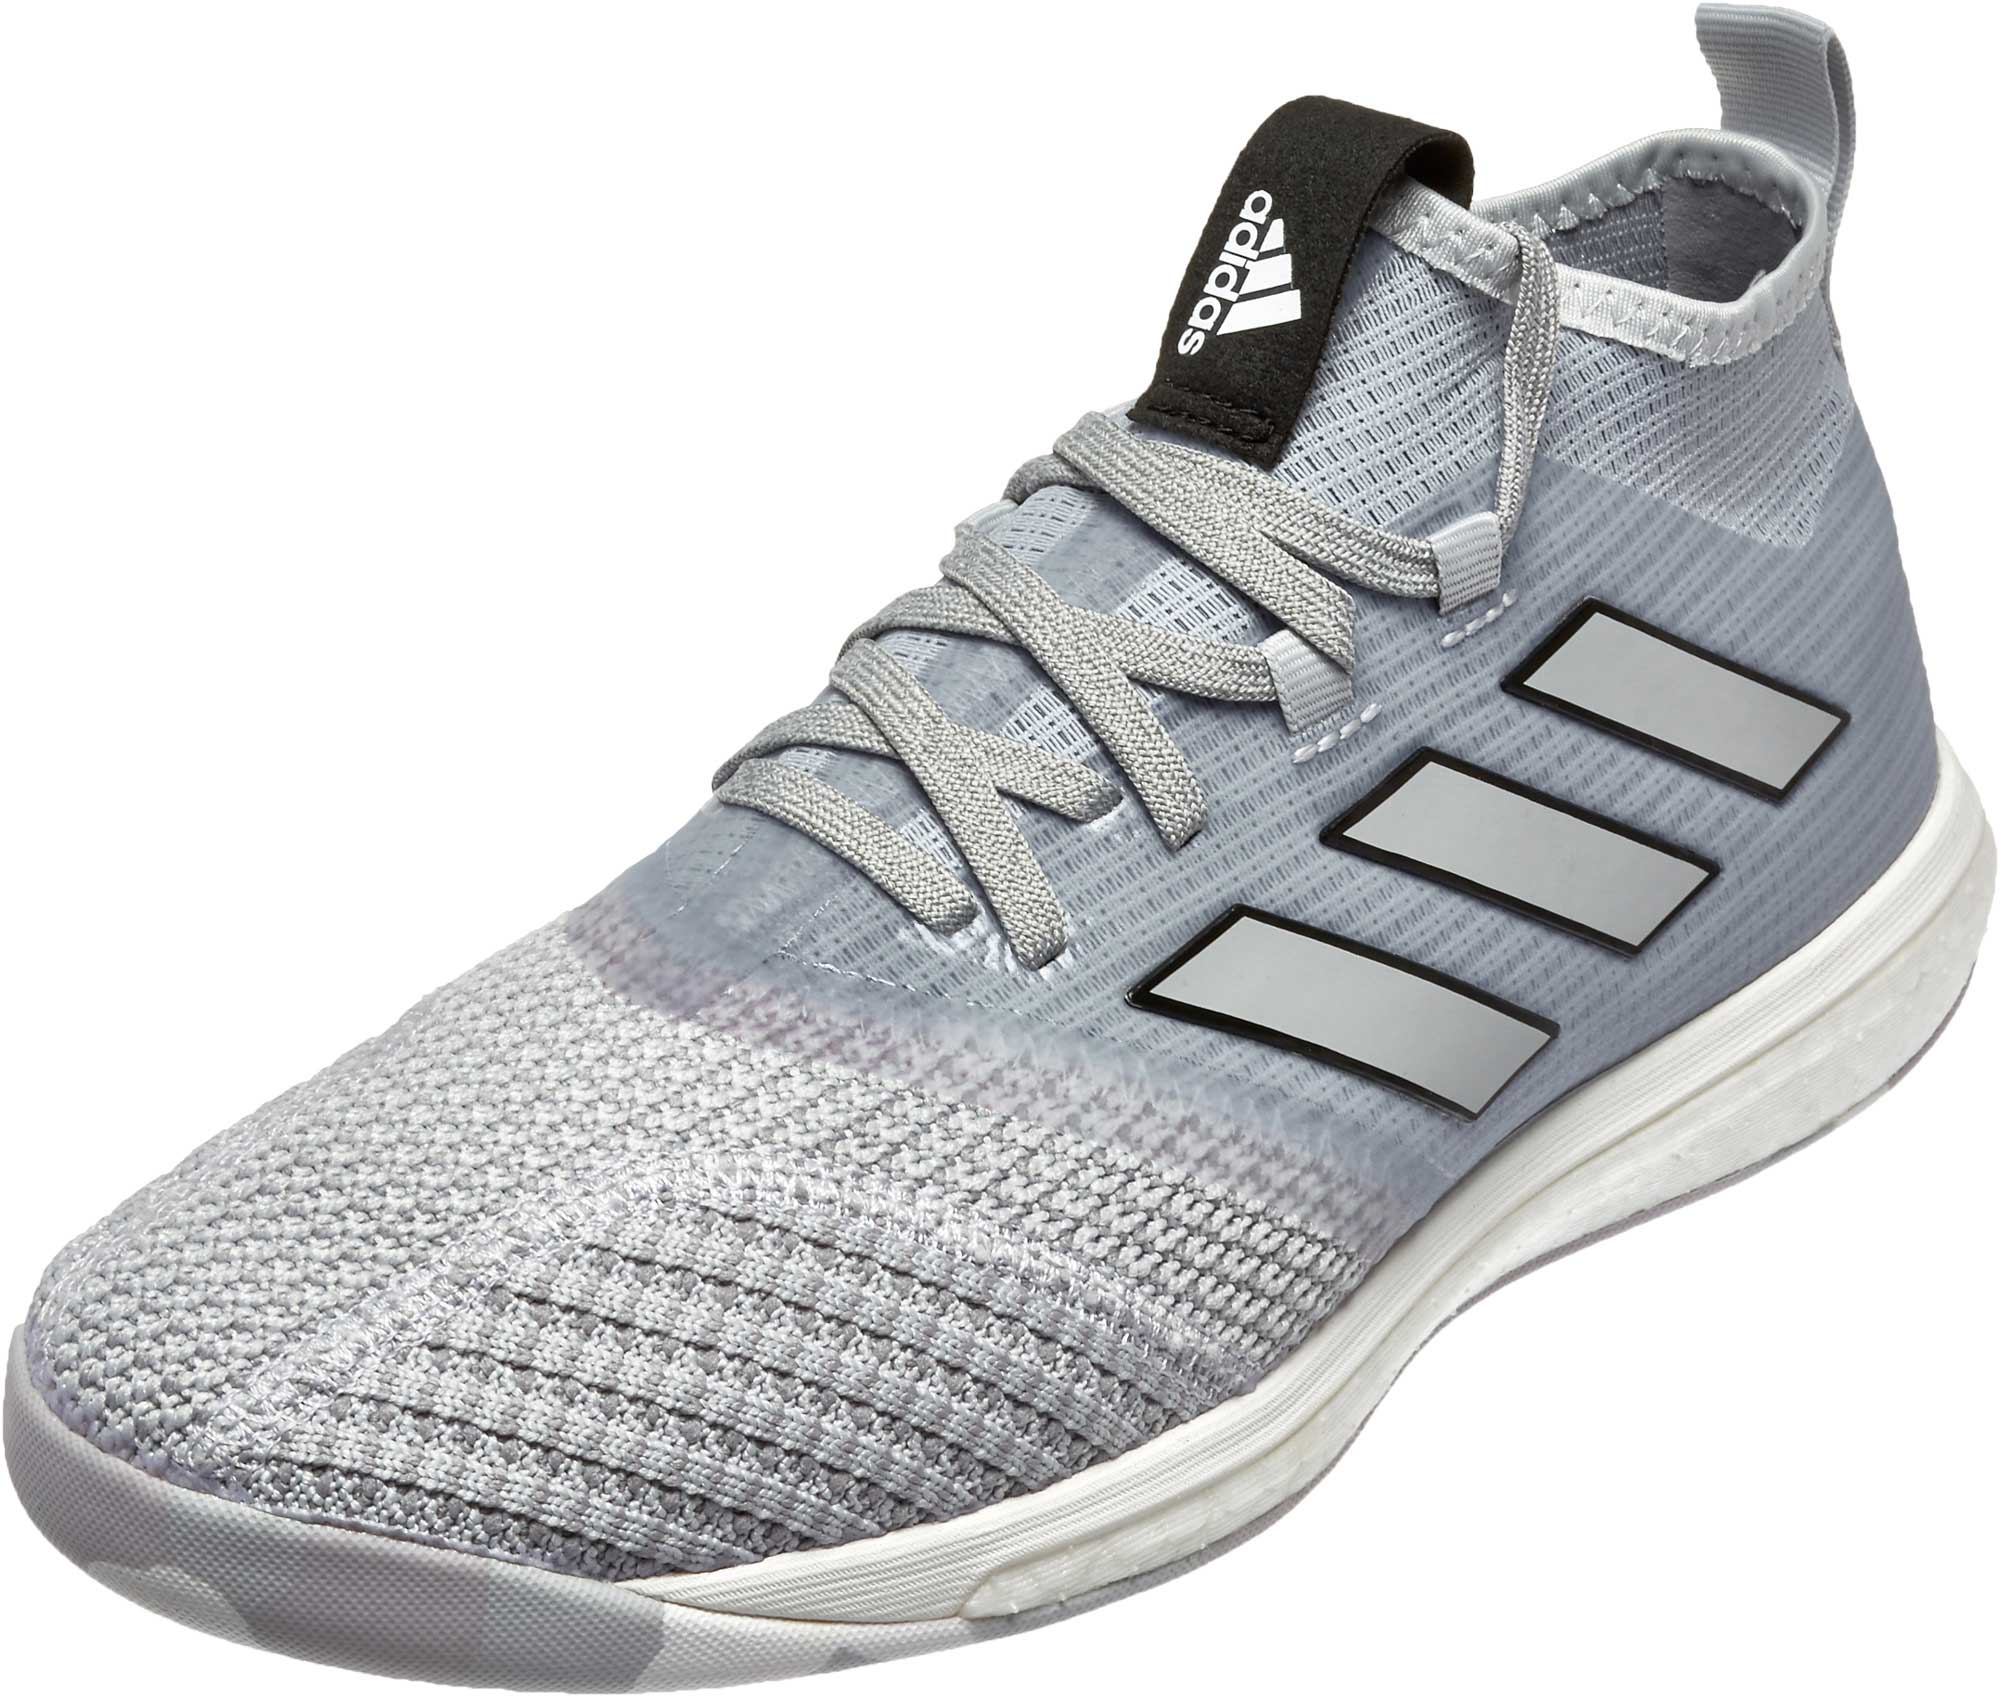 adidas ACE 17.1 TR Soccer Shoes - Clear Grey Mid - Soccer